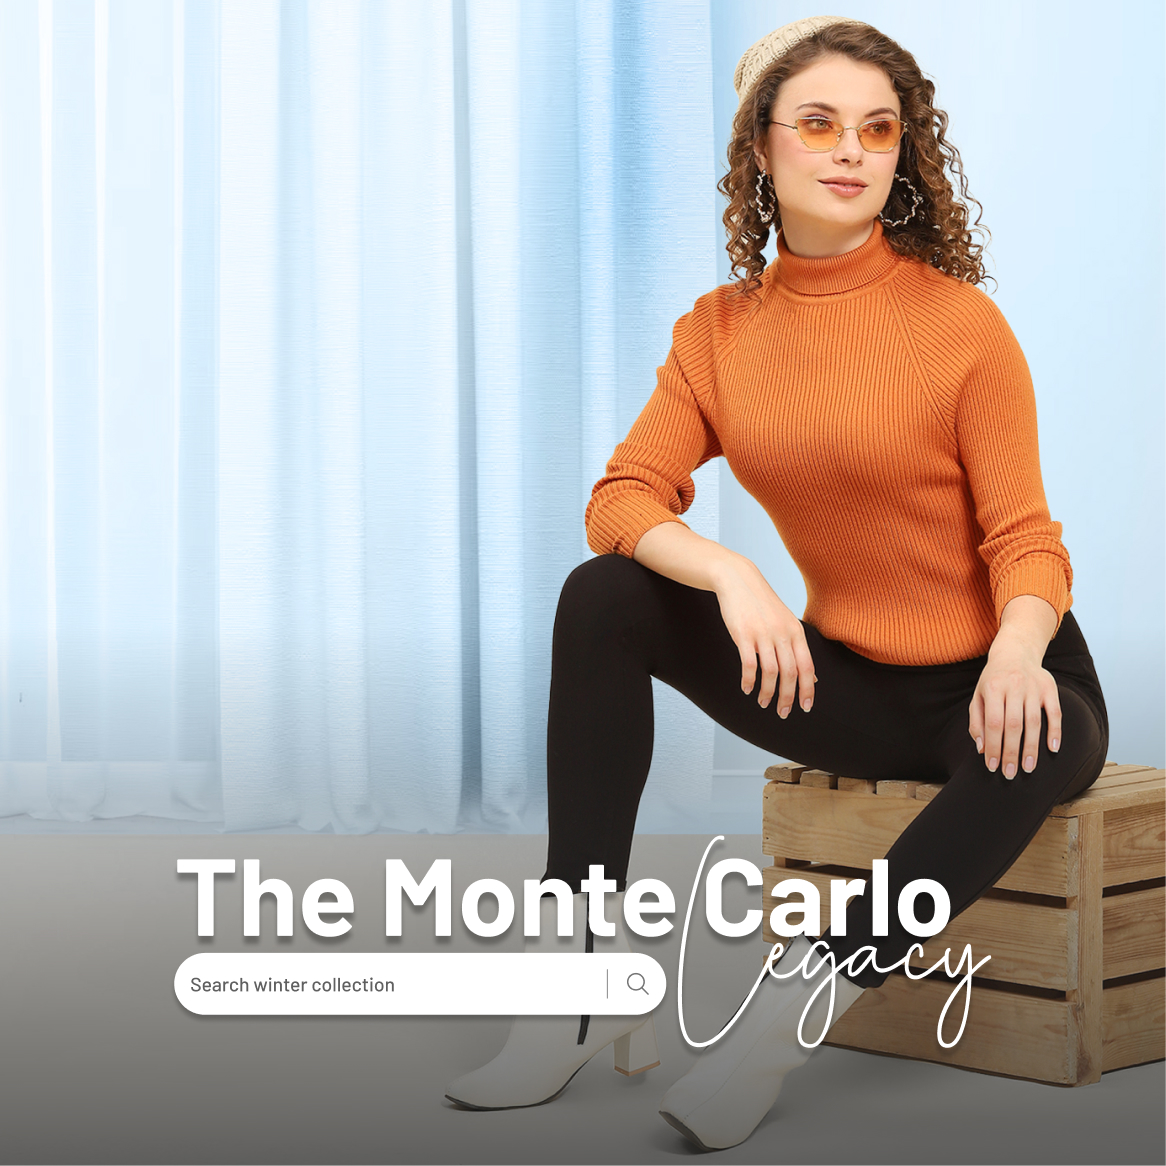 Crafting the perfect winter pullovers, sweaters & cardigans for four decades. #montecarlo #legacy #winterfashion #wintersweater #pullover #womenfashion #ladiesfashion #womensfashion #fashion #fashionstyle #modestfashion #fashionlover #clothing #woman #fashiongram